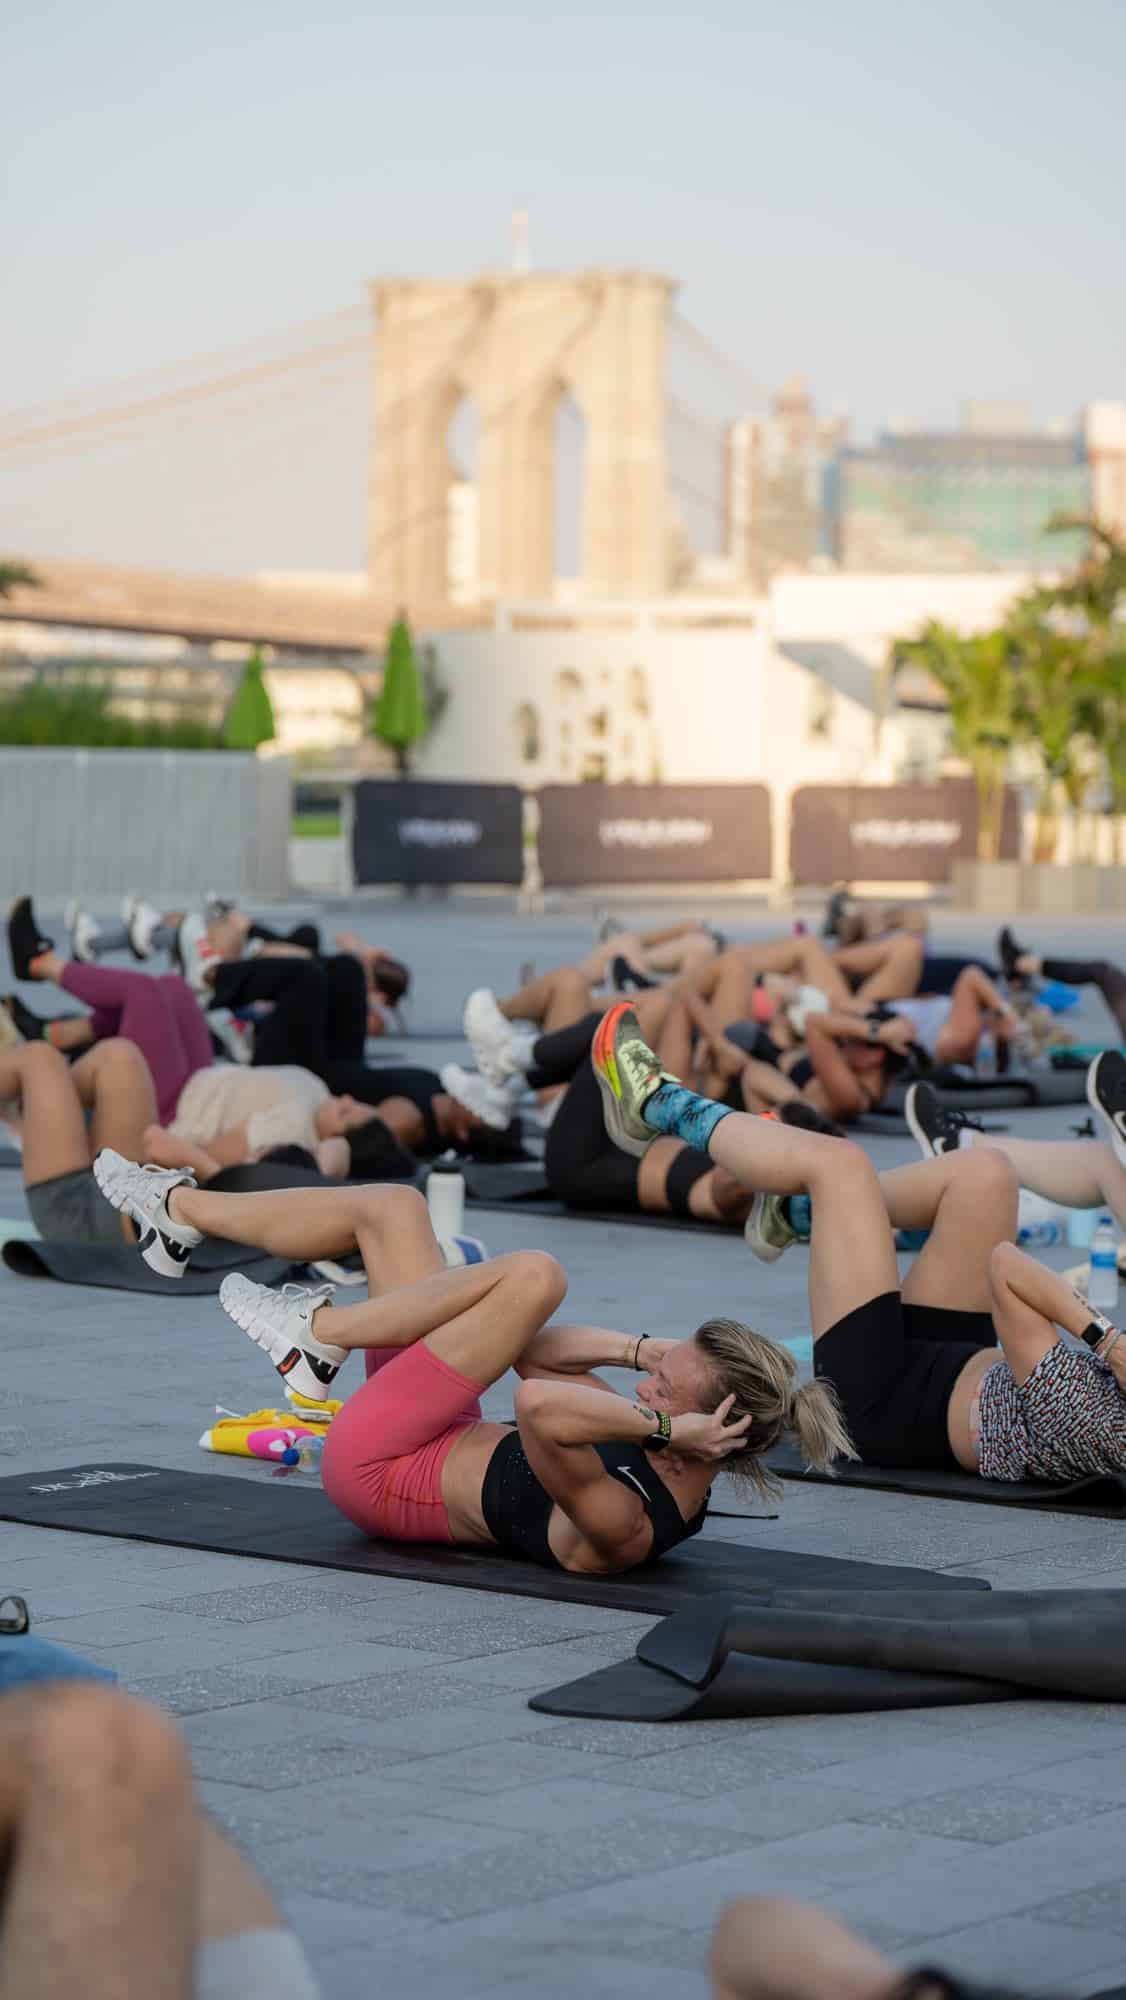 Sculpt. Tone. Lengthen. Get ready to hustle at the next Seaport Fit Plus-Up event with @obe_fitness. Instructors @spencercjones and @samantha.goltz will lead this high-energy 45-minute session, featuring sequences aimed at fatiguing each muscle group 

🗓️Thursday, 8/31
 6:30 - 7:30pm
The Rooftop at Pier 17
is presented by @nyphospital

Proceeds from this feel-good session will be donated to New York Cares.

Details ➤ link in bio